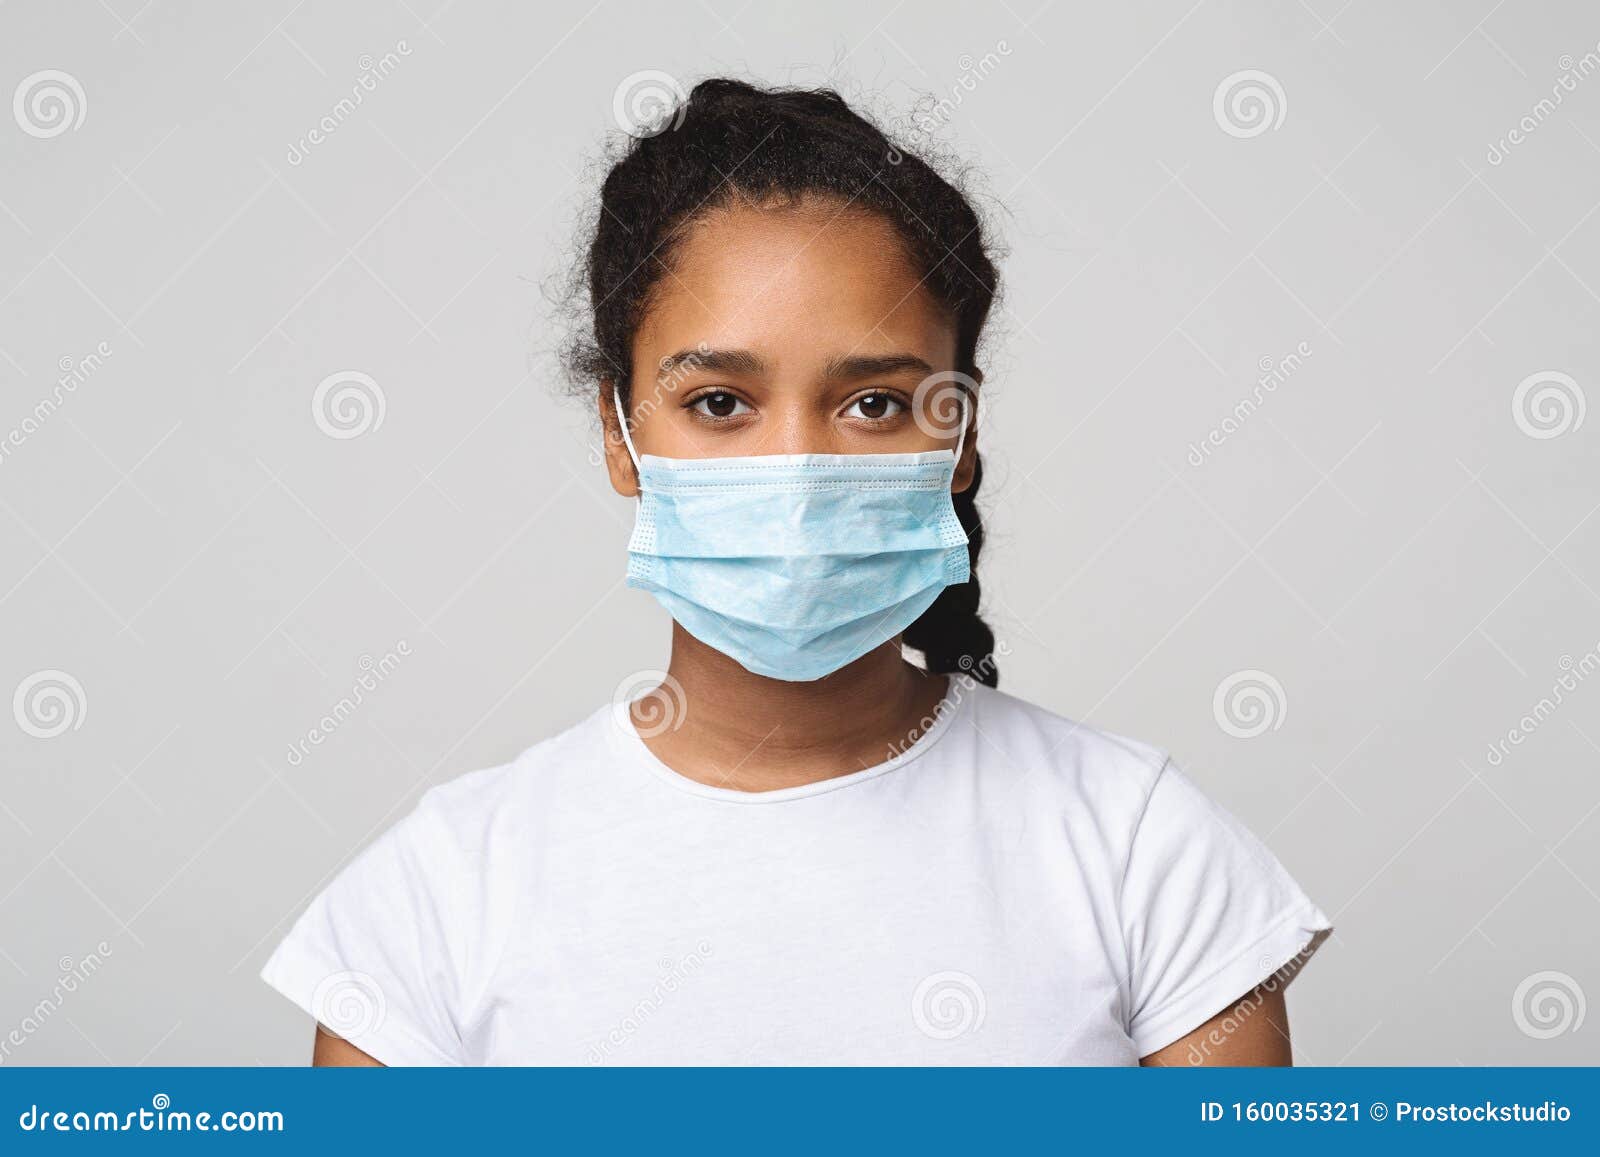 Teen Black Girl with Protective Face Mask Stock Image - Image of grey ...